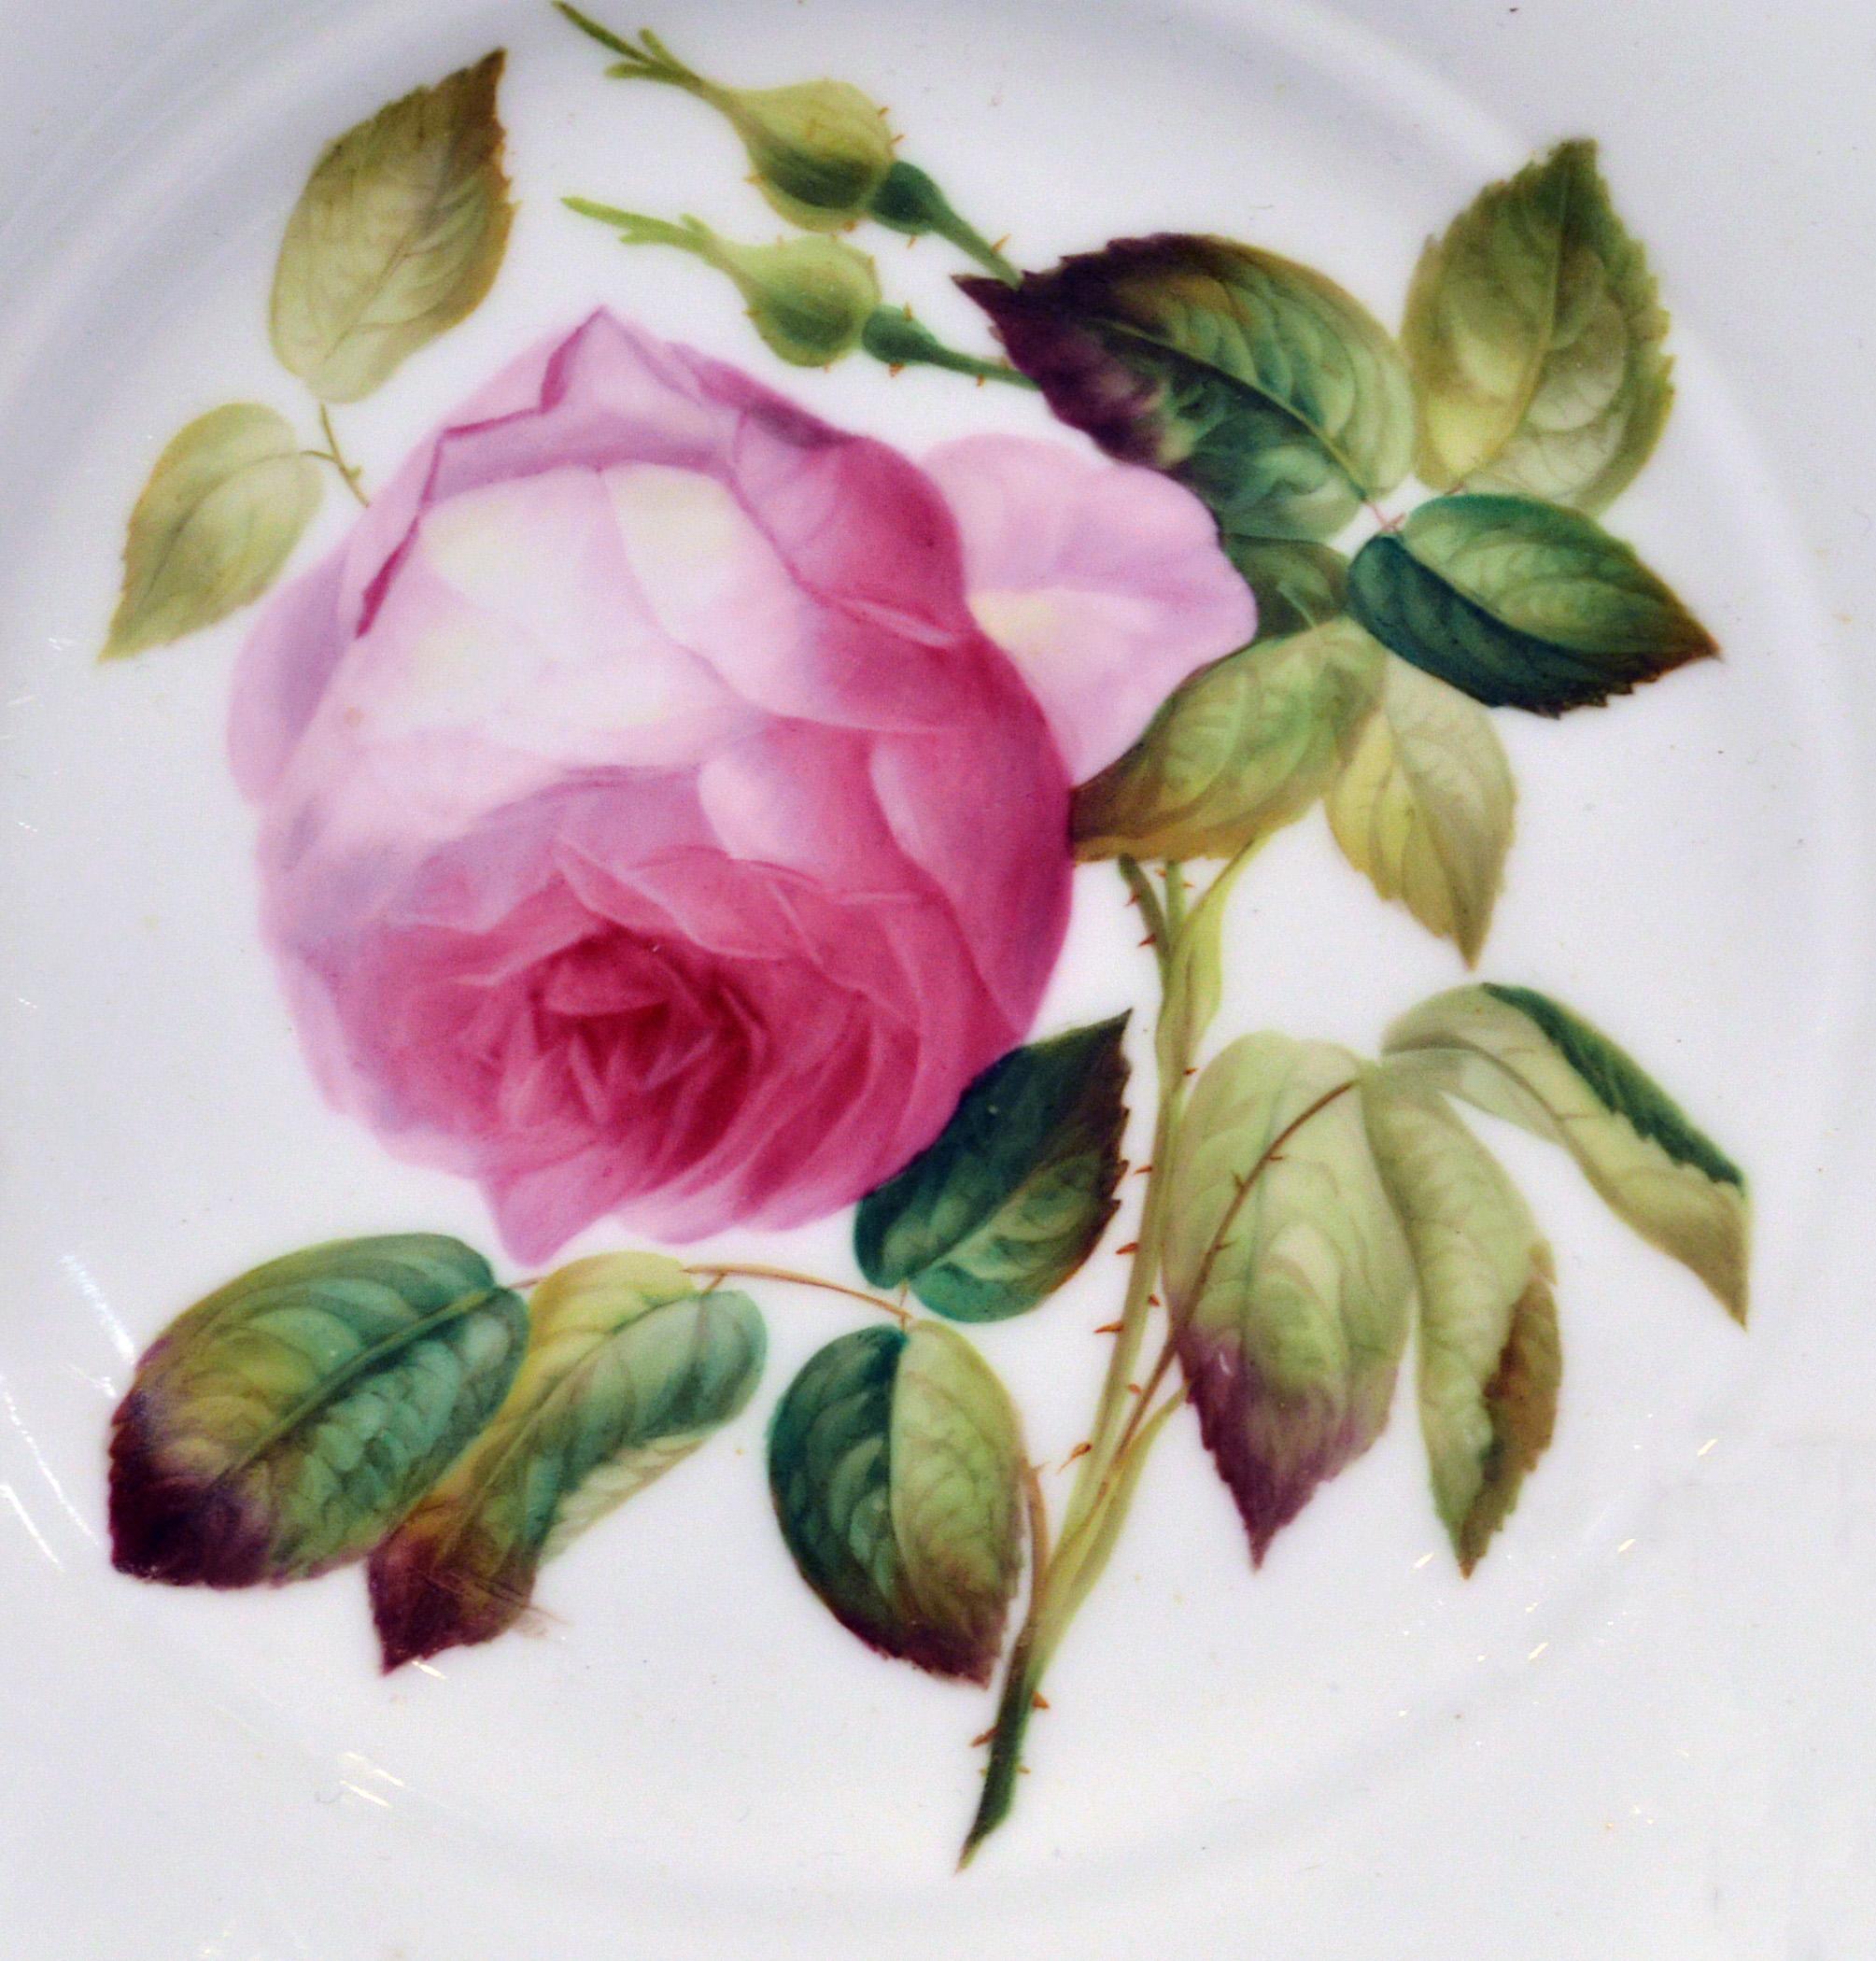 Minton Bone China porcelain botanical specimen plate of a rose,
Pattern #9762,
circa 1850

The fine Minton Bone China plate depicts a specimen of a rose named on the reverse. The plate with excellent gilding and openwork in six places on the